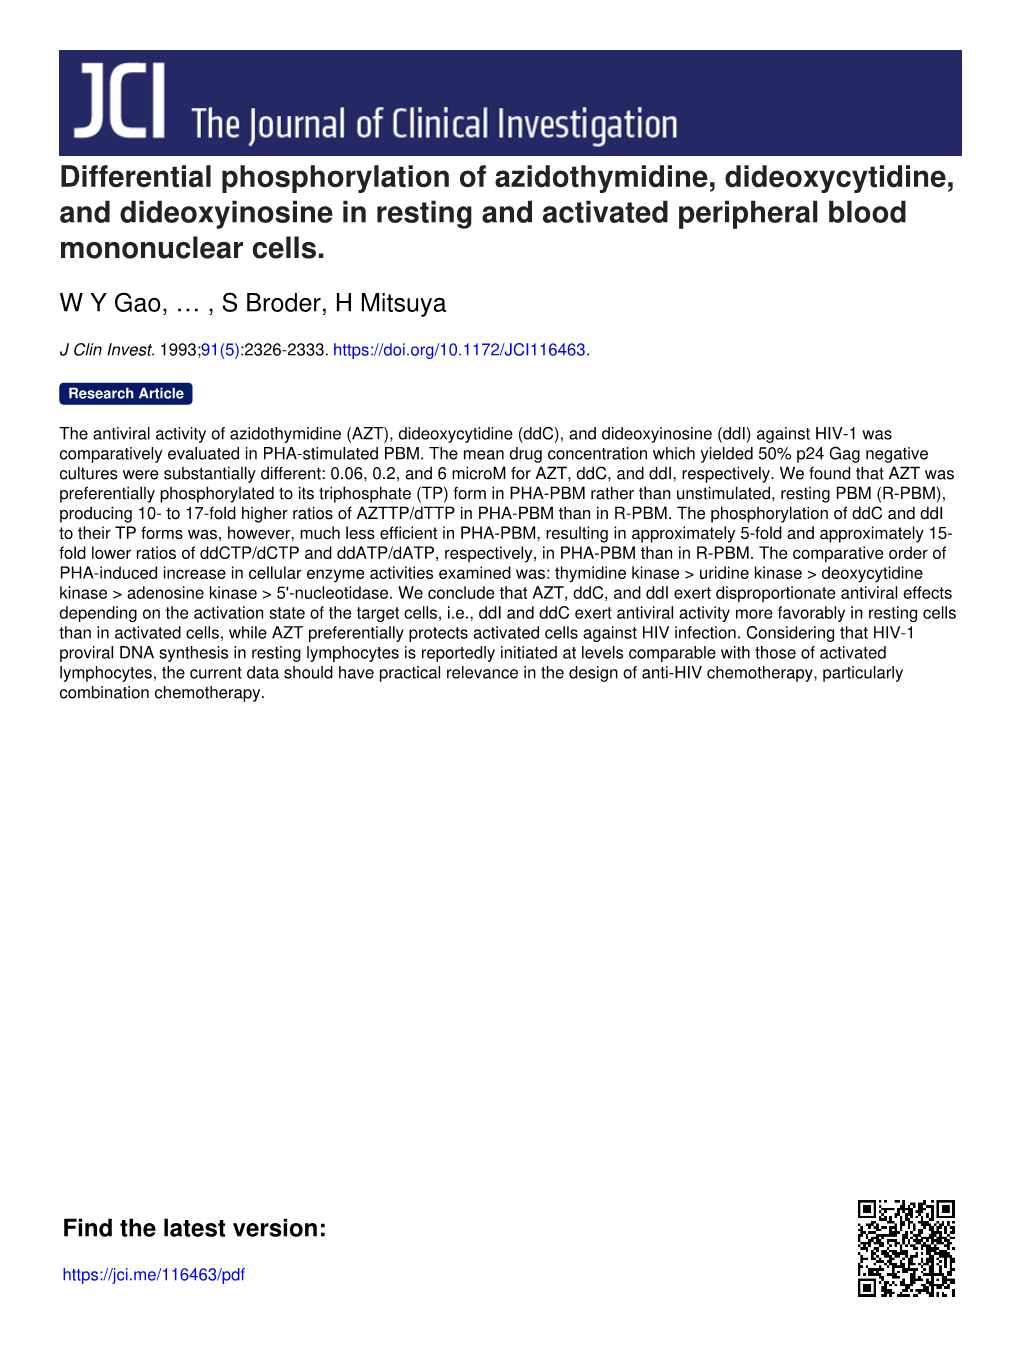 Differential Phosphorylation of Azidothymidine, Dideoxycytidine, and Dideoxyinosine in Resting and Activated Peripheral Blood Mononuclear Cells